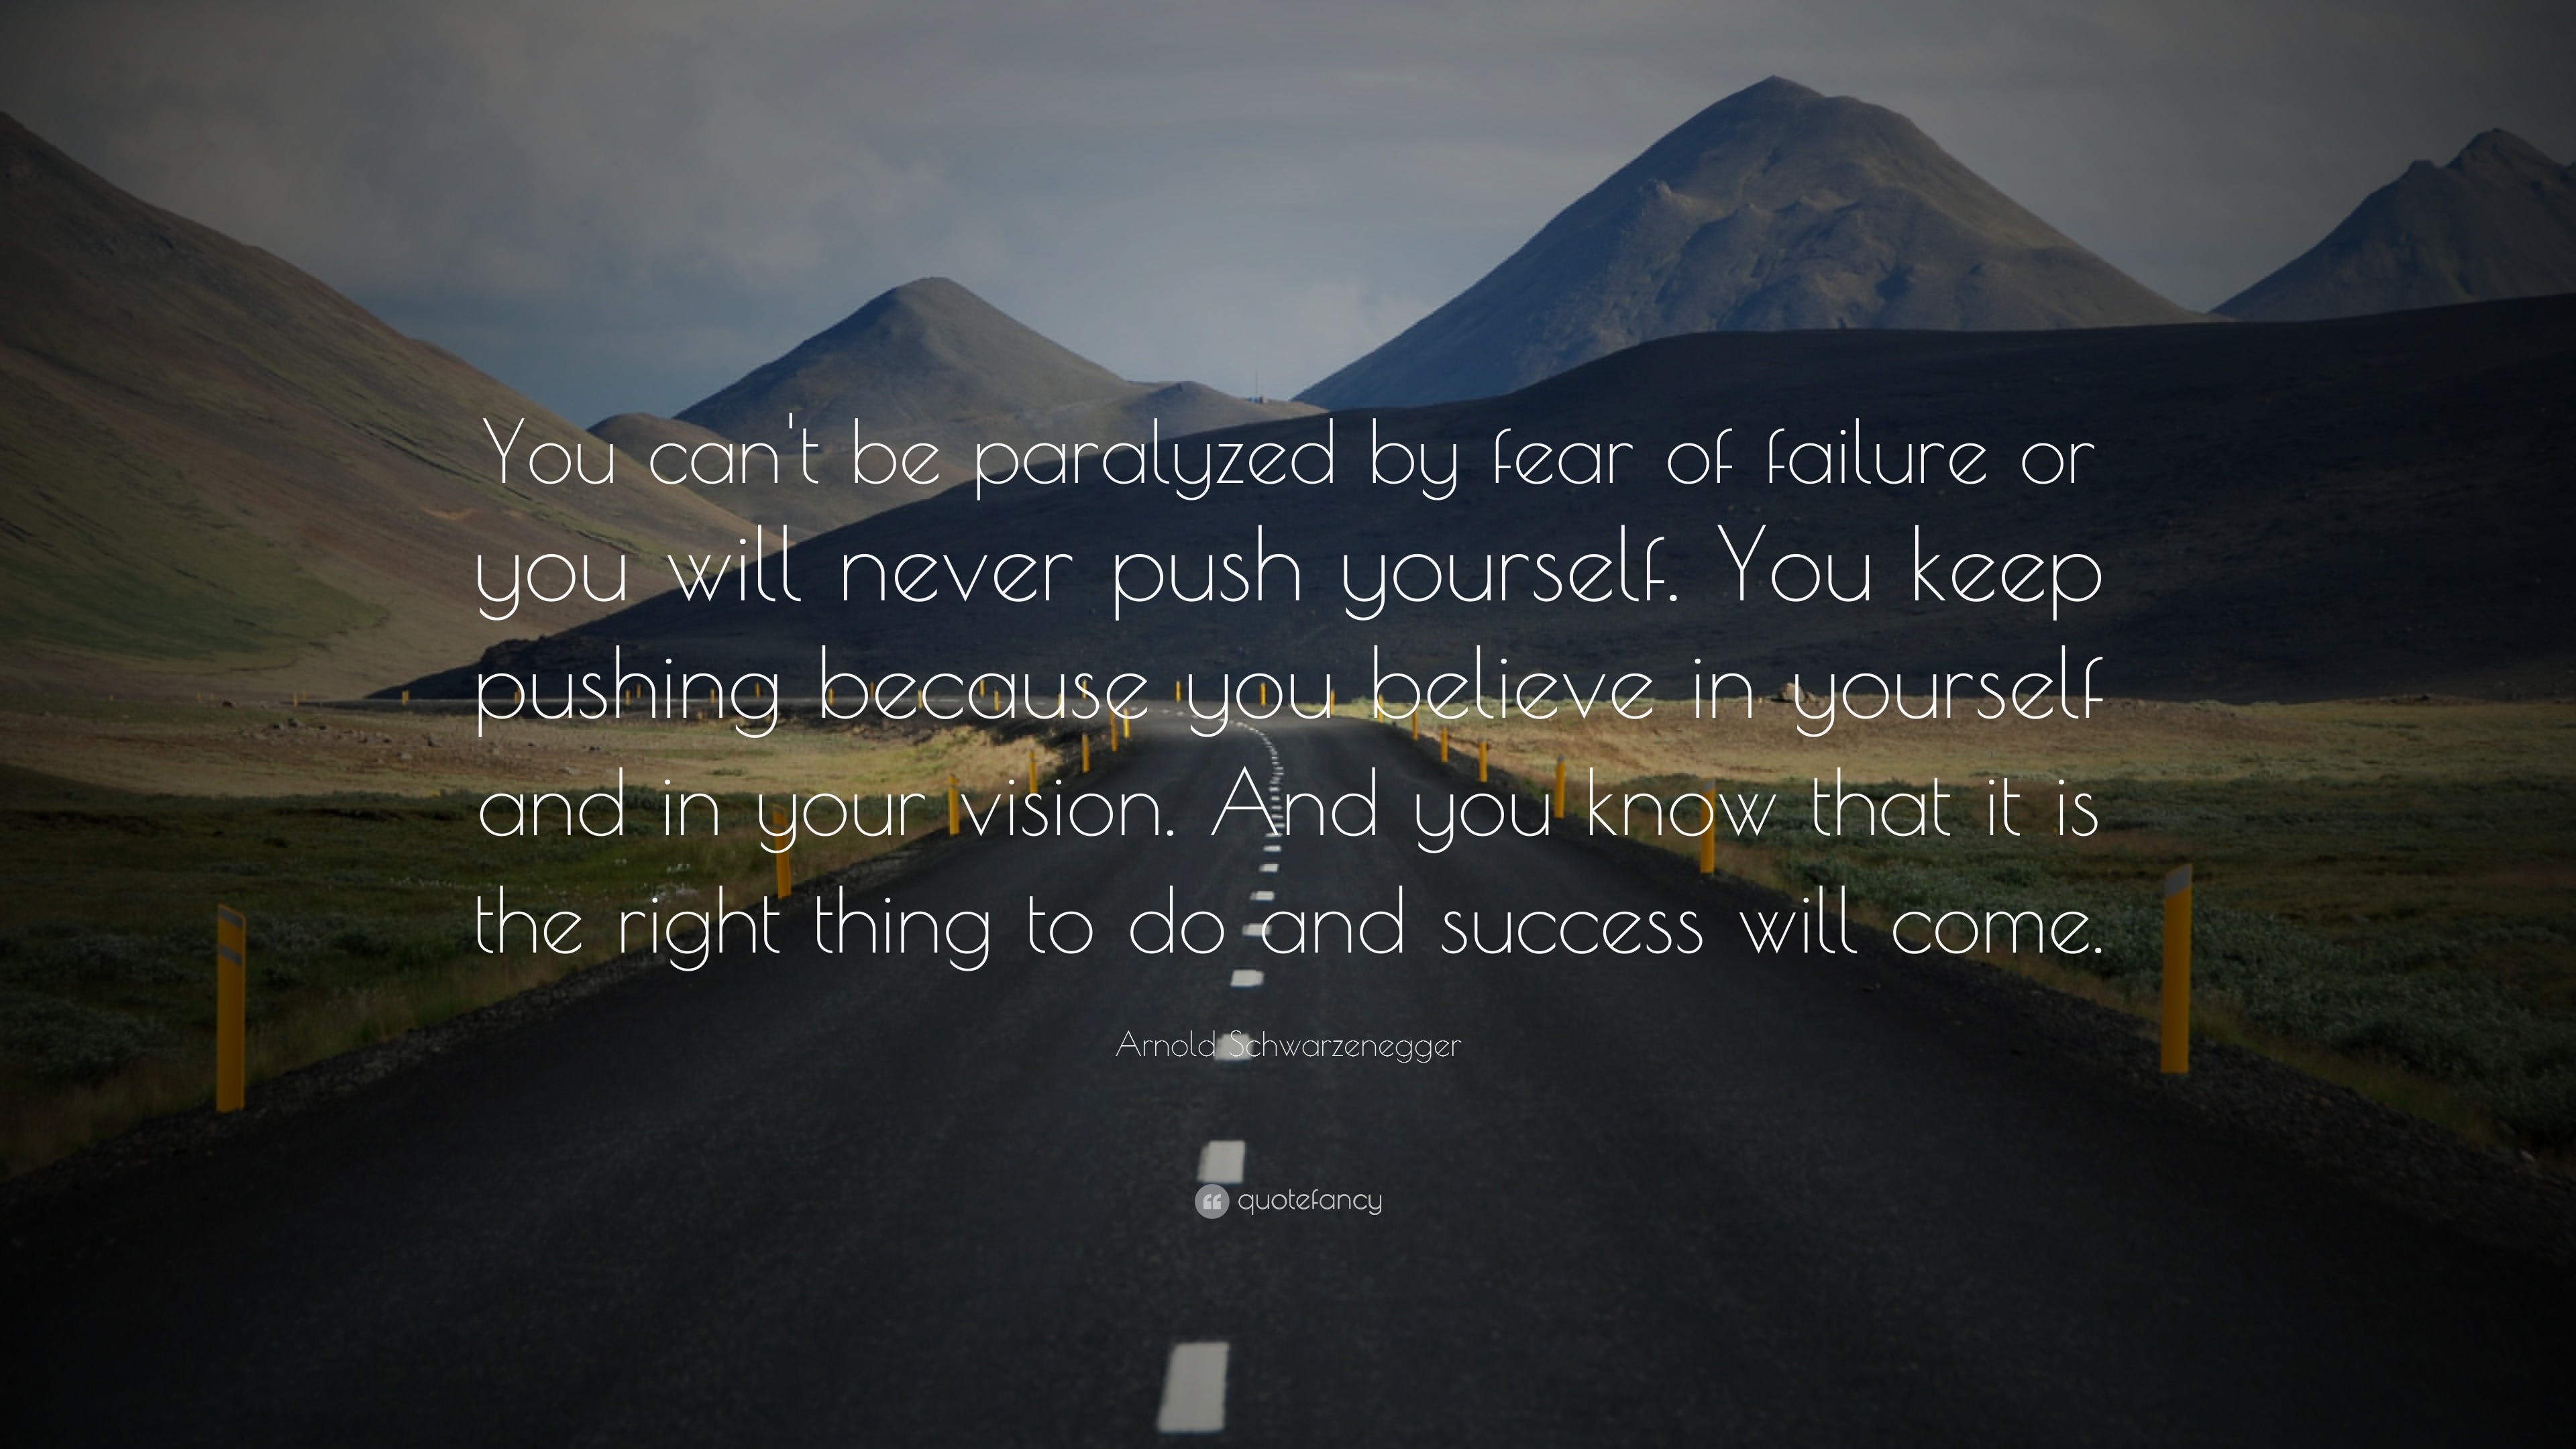 Arnold Schwarzenegger Quote: "You can't be paralyzed by fear of failure or you will never push ...